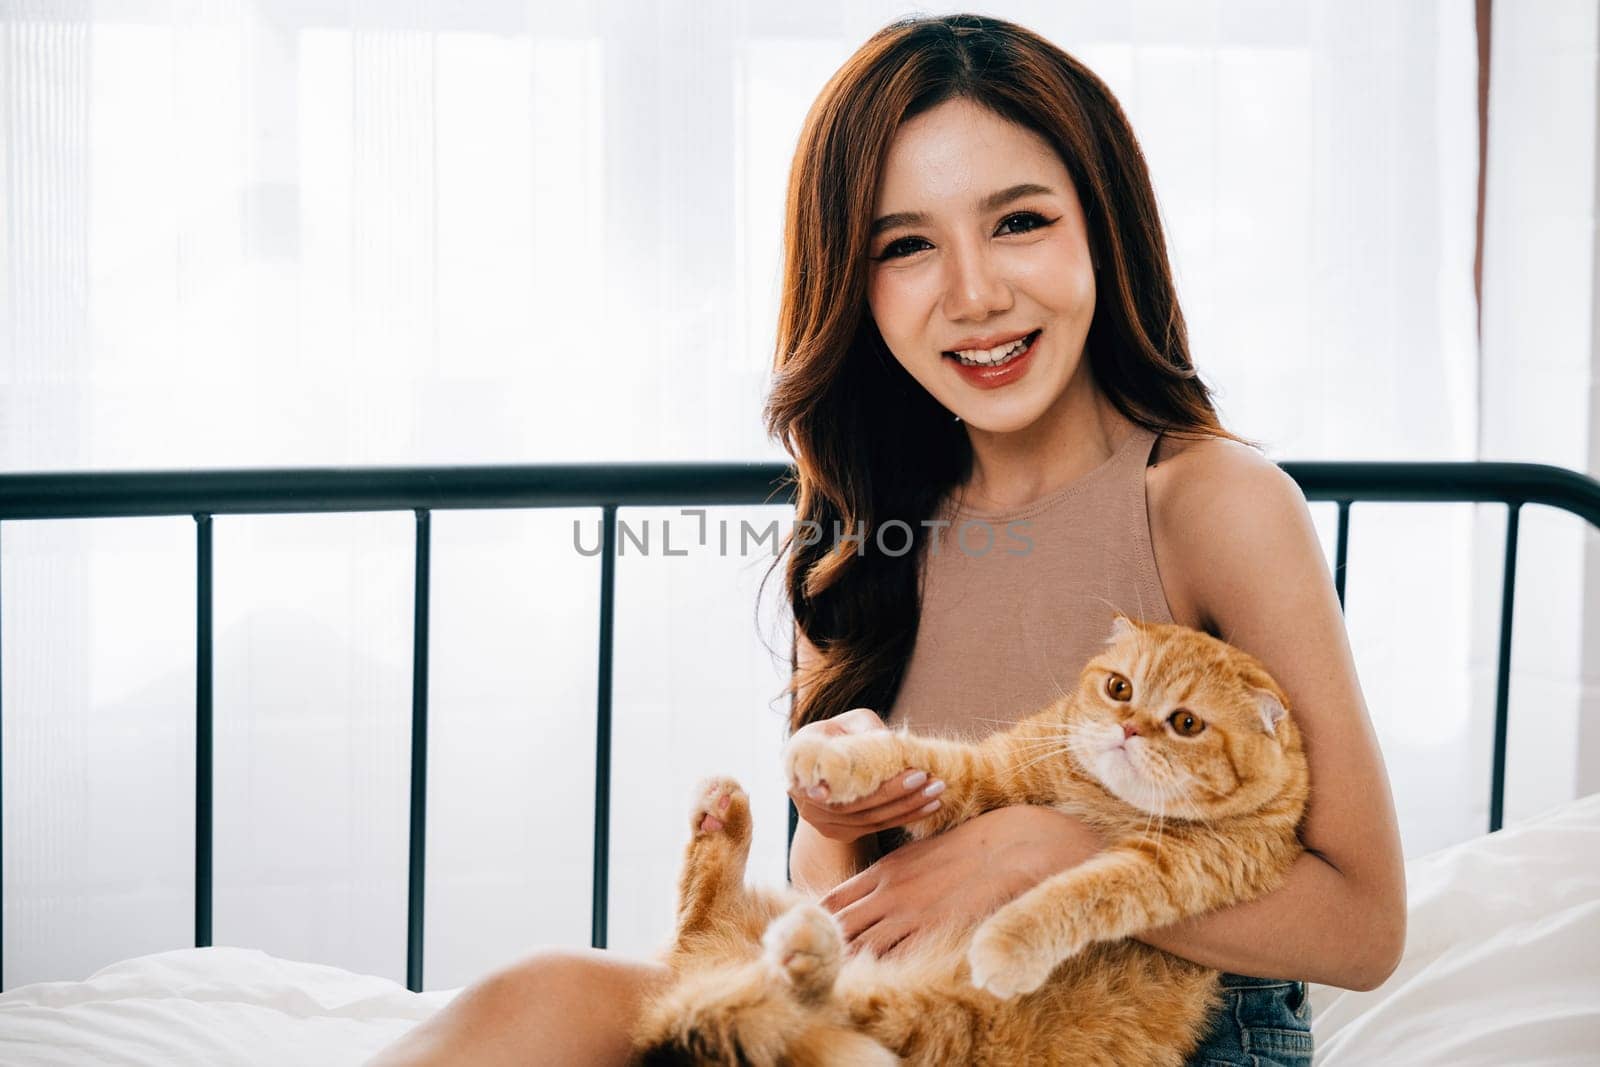 In the bedroom, a young woman smiles with delight while holding her cute Scottish Fold cat, exemplifying the affectionate bond between owner and pet, a portrait of happiness. Pet love by Sorapop